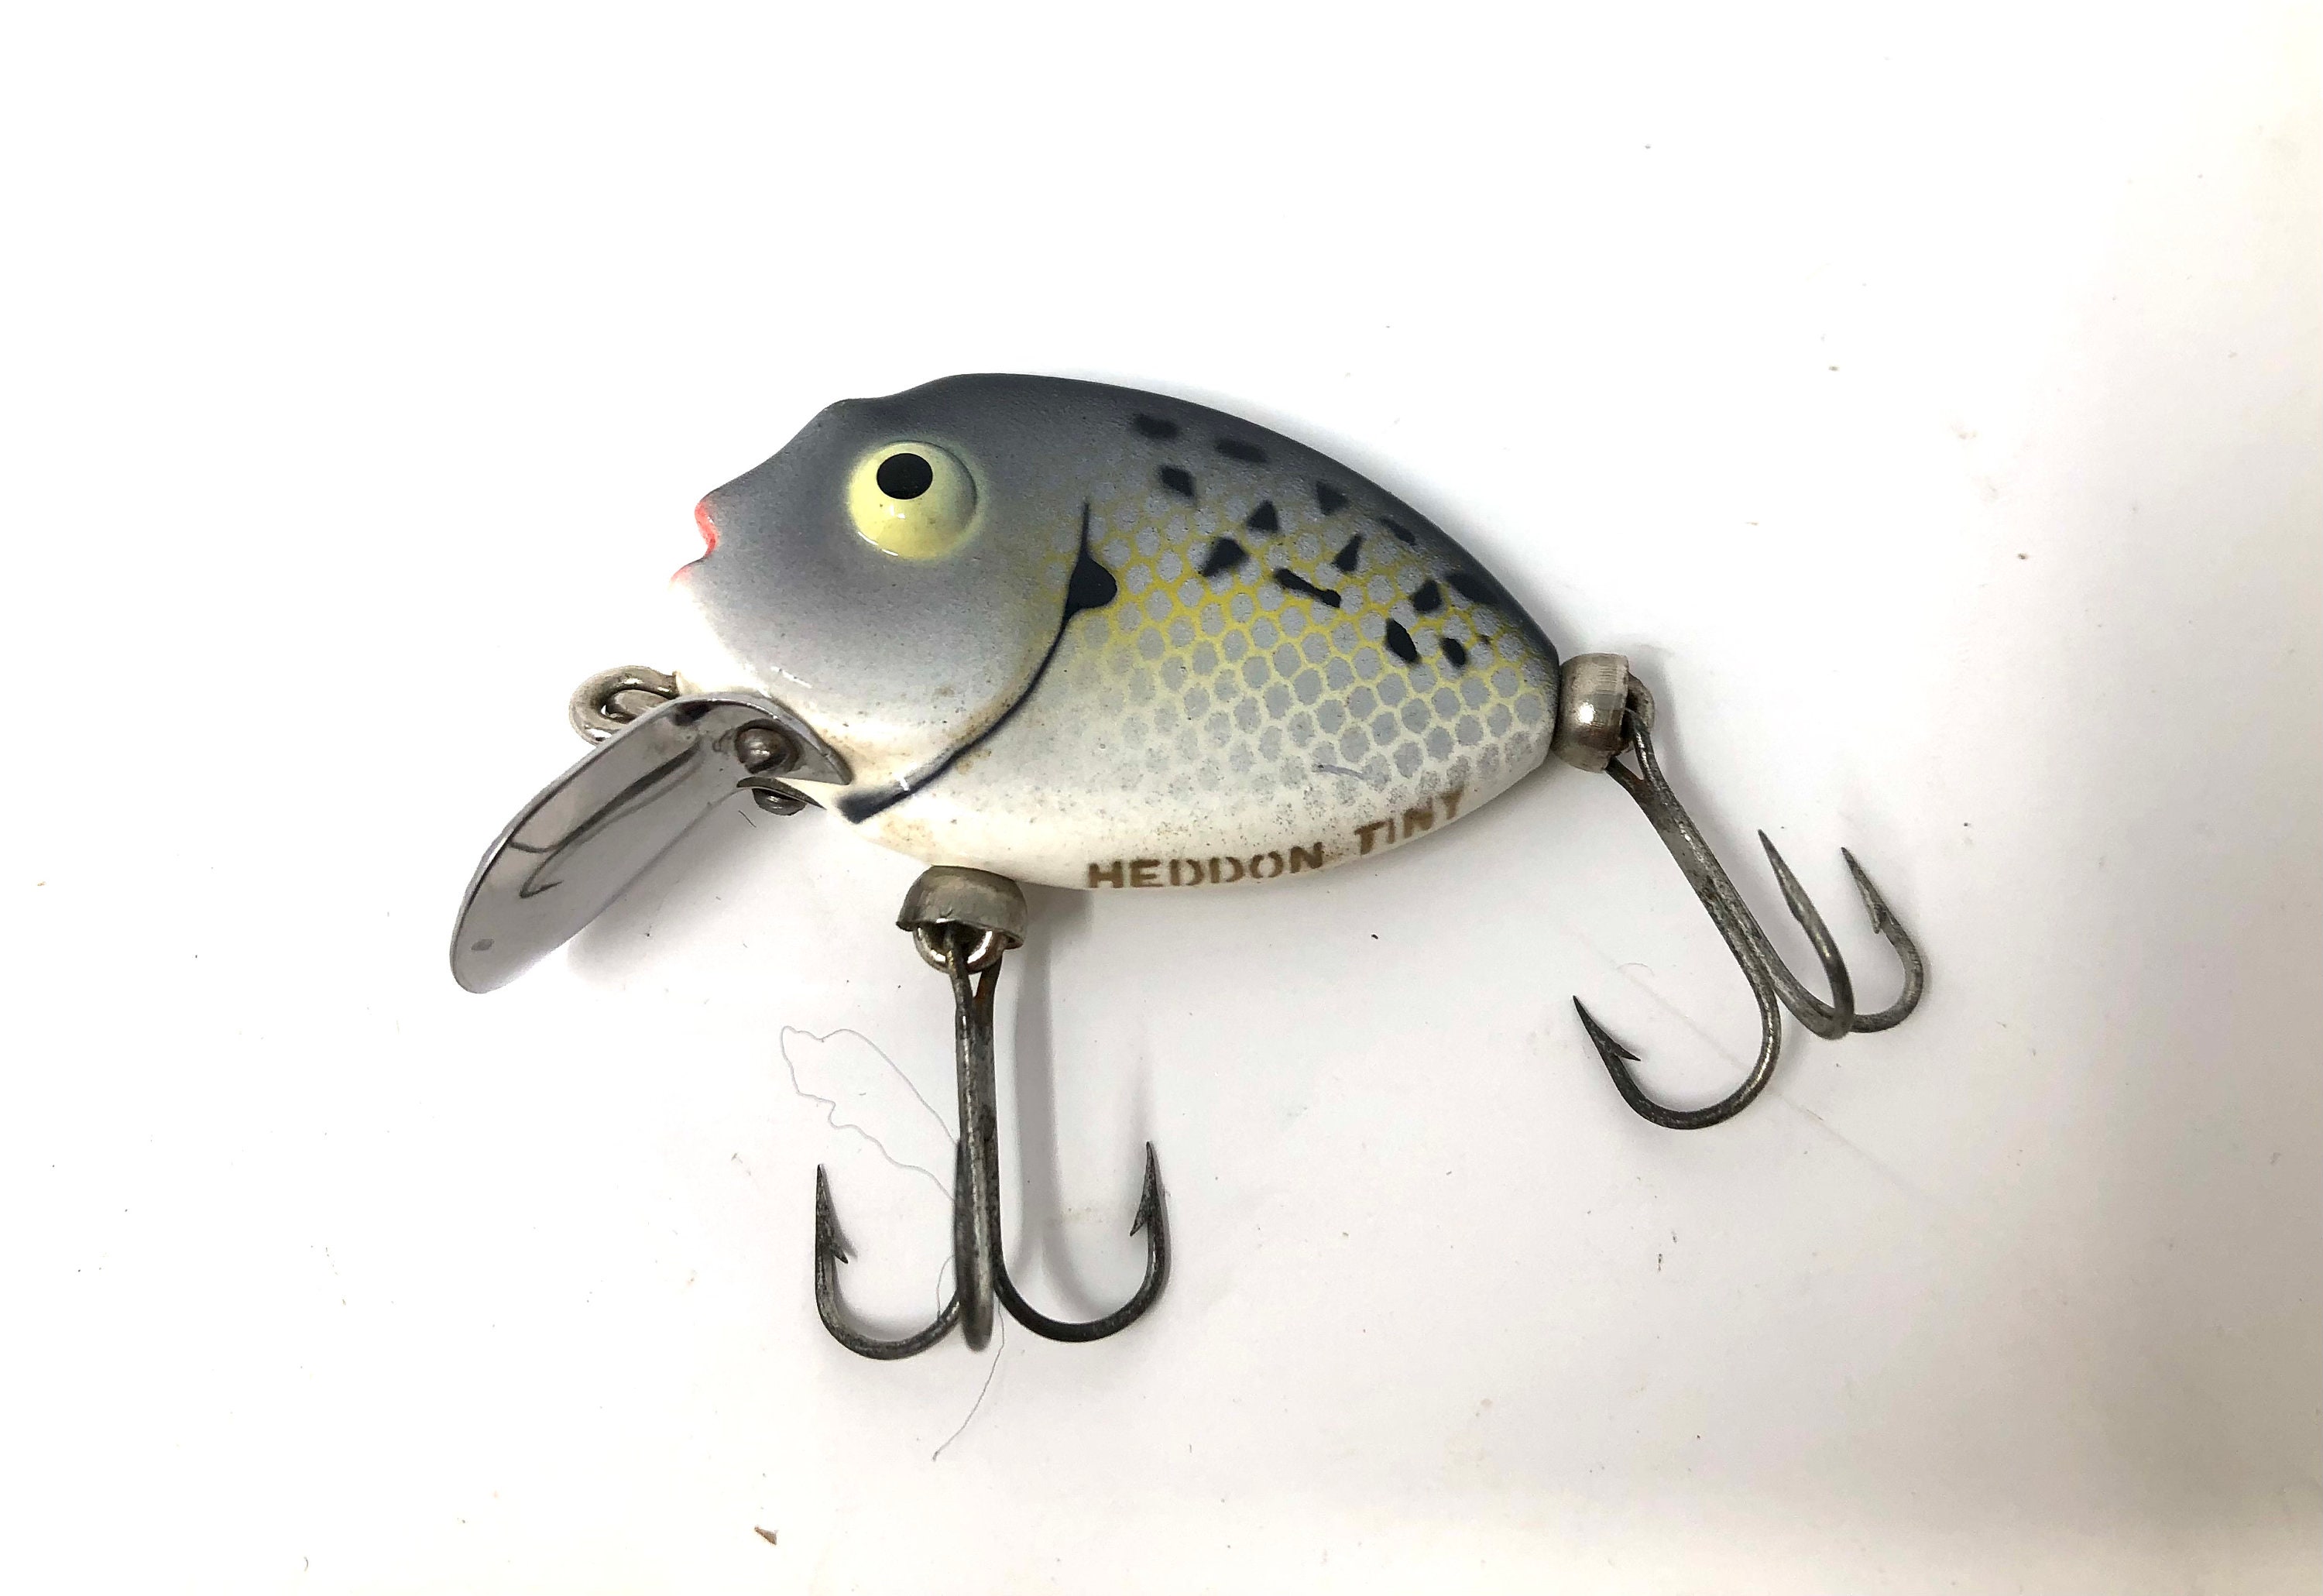 Vintage Heddon Tiny Punkinseed Fishing Lure / Antique Heddon Tiny  Punkinseed Crappie Fishing Lure / Excellent Fishing Crank Bait Lure -   Denmark